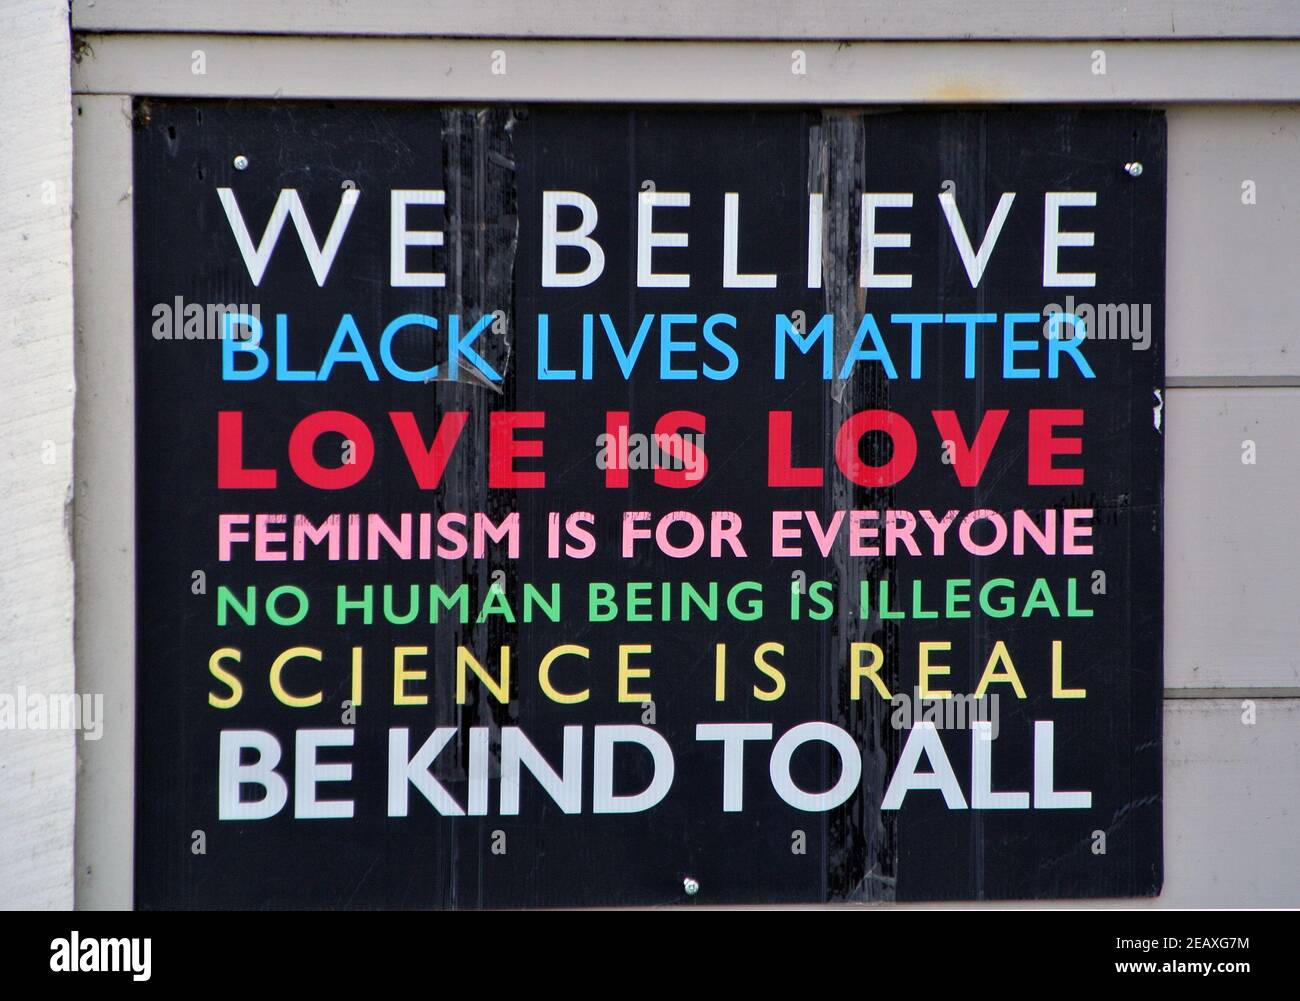 sign on building during black lives matter protestshow concern t for feminism , illegal imigratiion science beings real, love is love a all Stock Photo